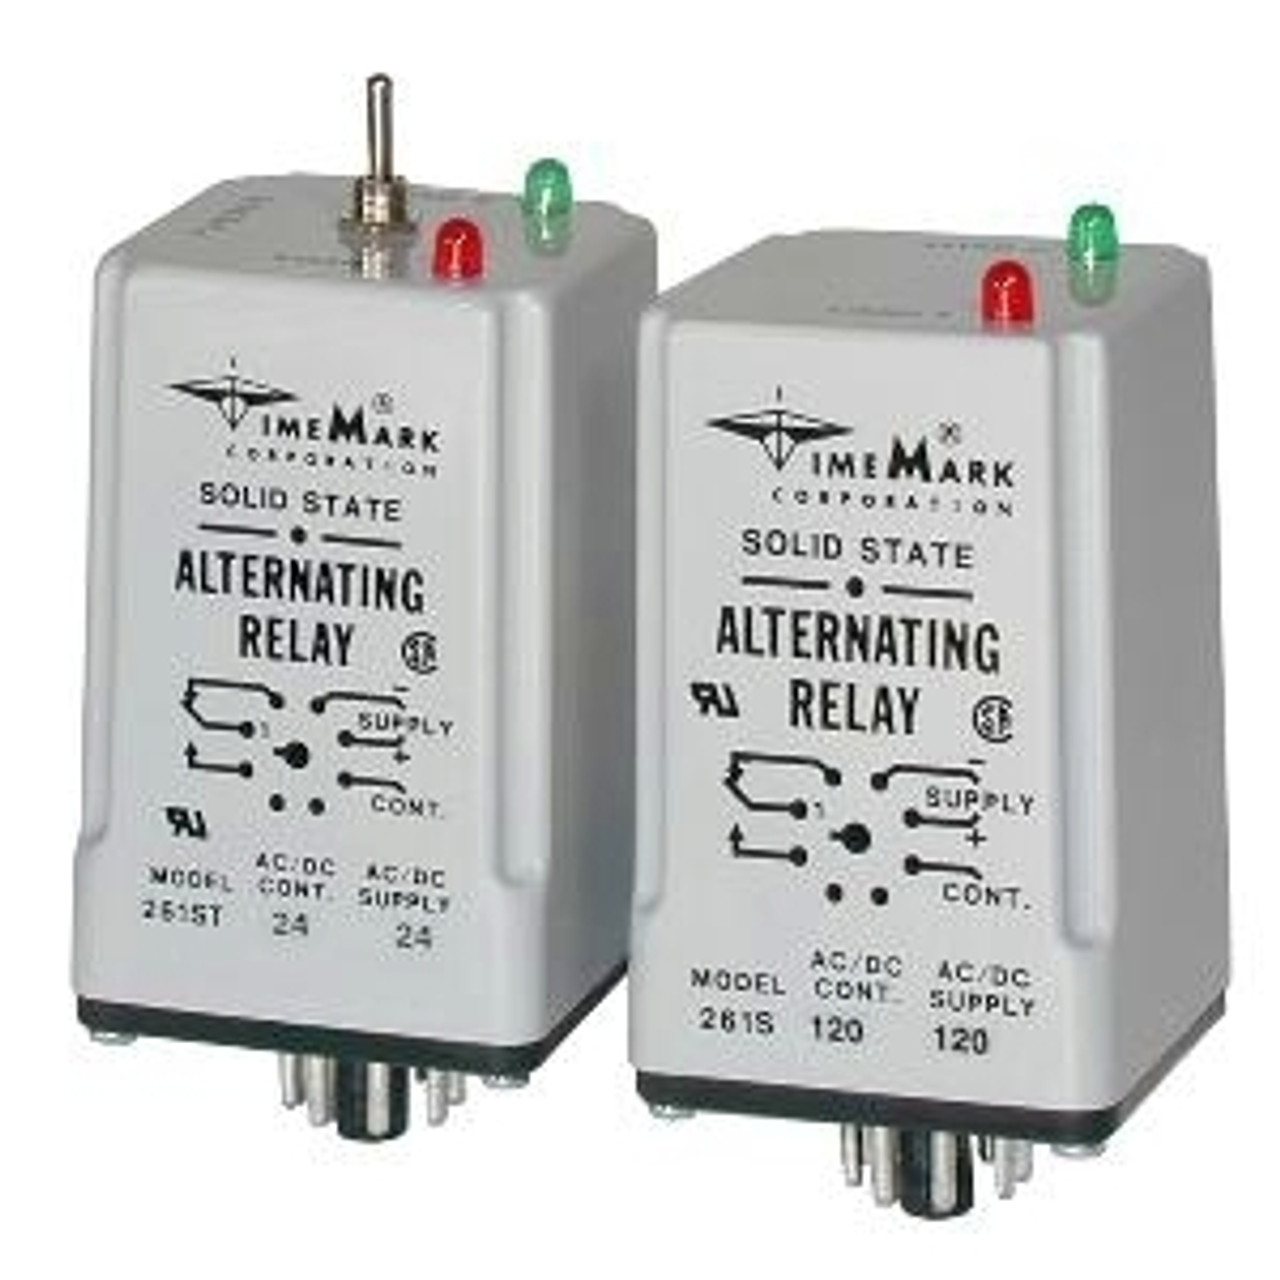 TimeMark 261-DT-24 Alternating Sequencing Relay